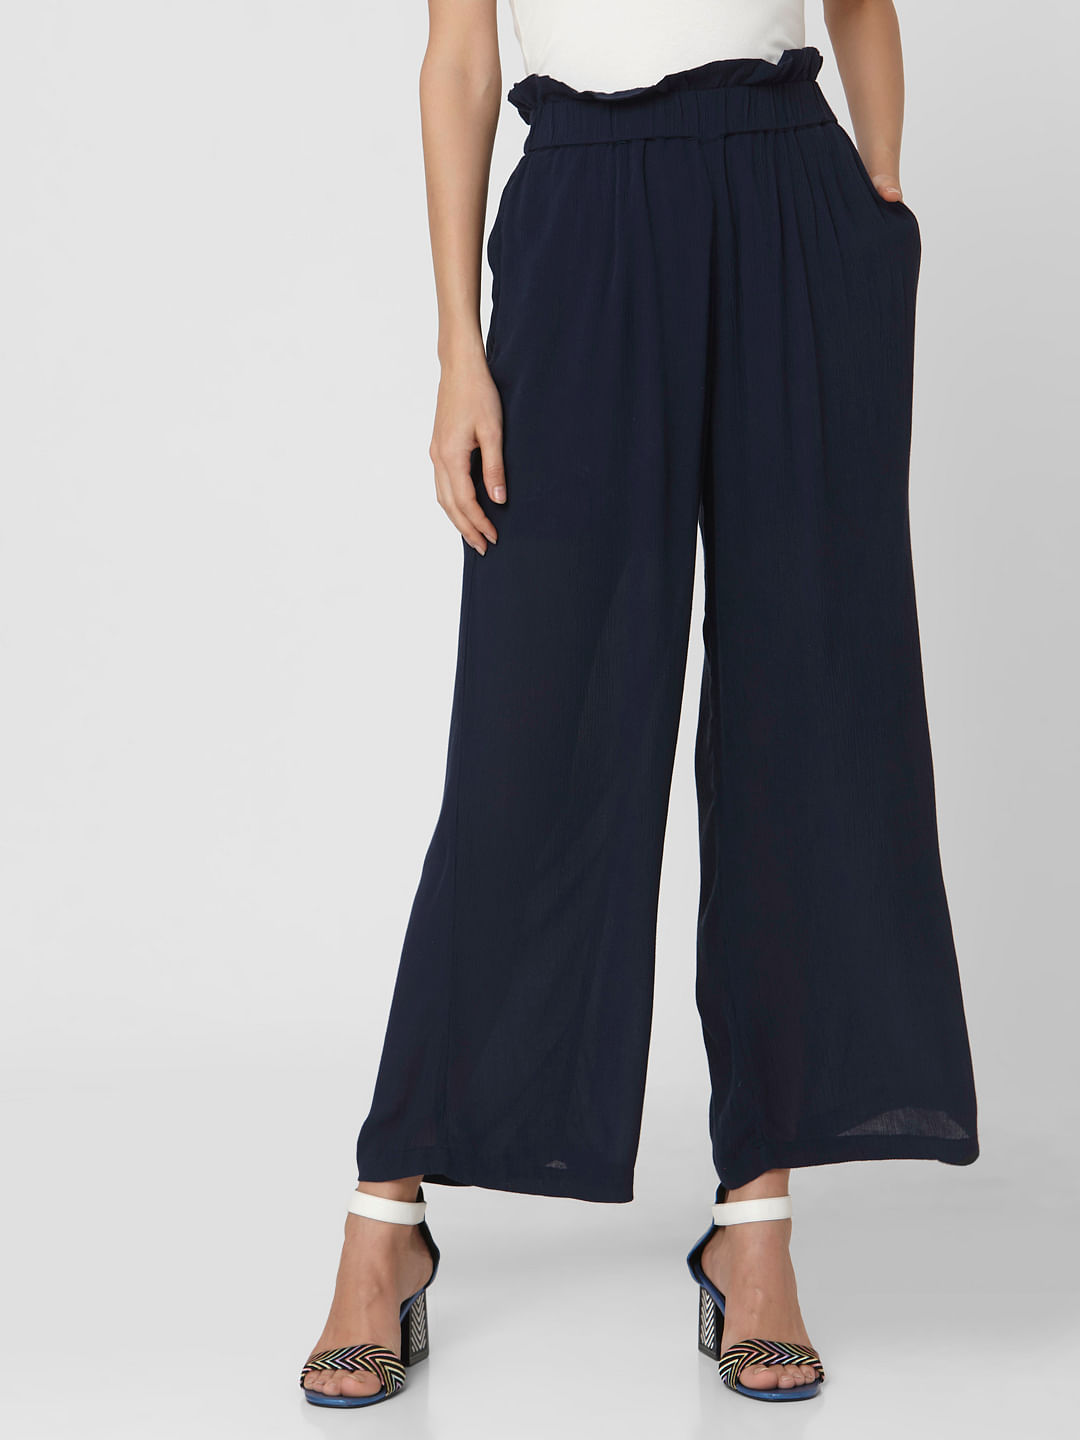 Rayon Navy Blue Palazzo Pants Style  Casual Pattern  Plain at Rs 230   Piece in Pune